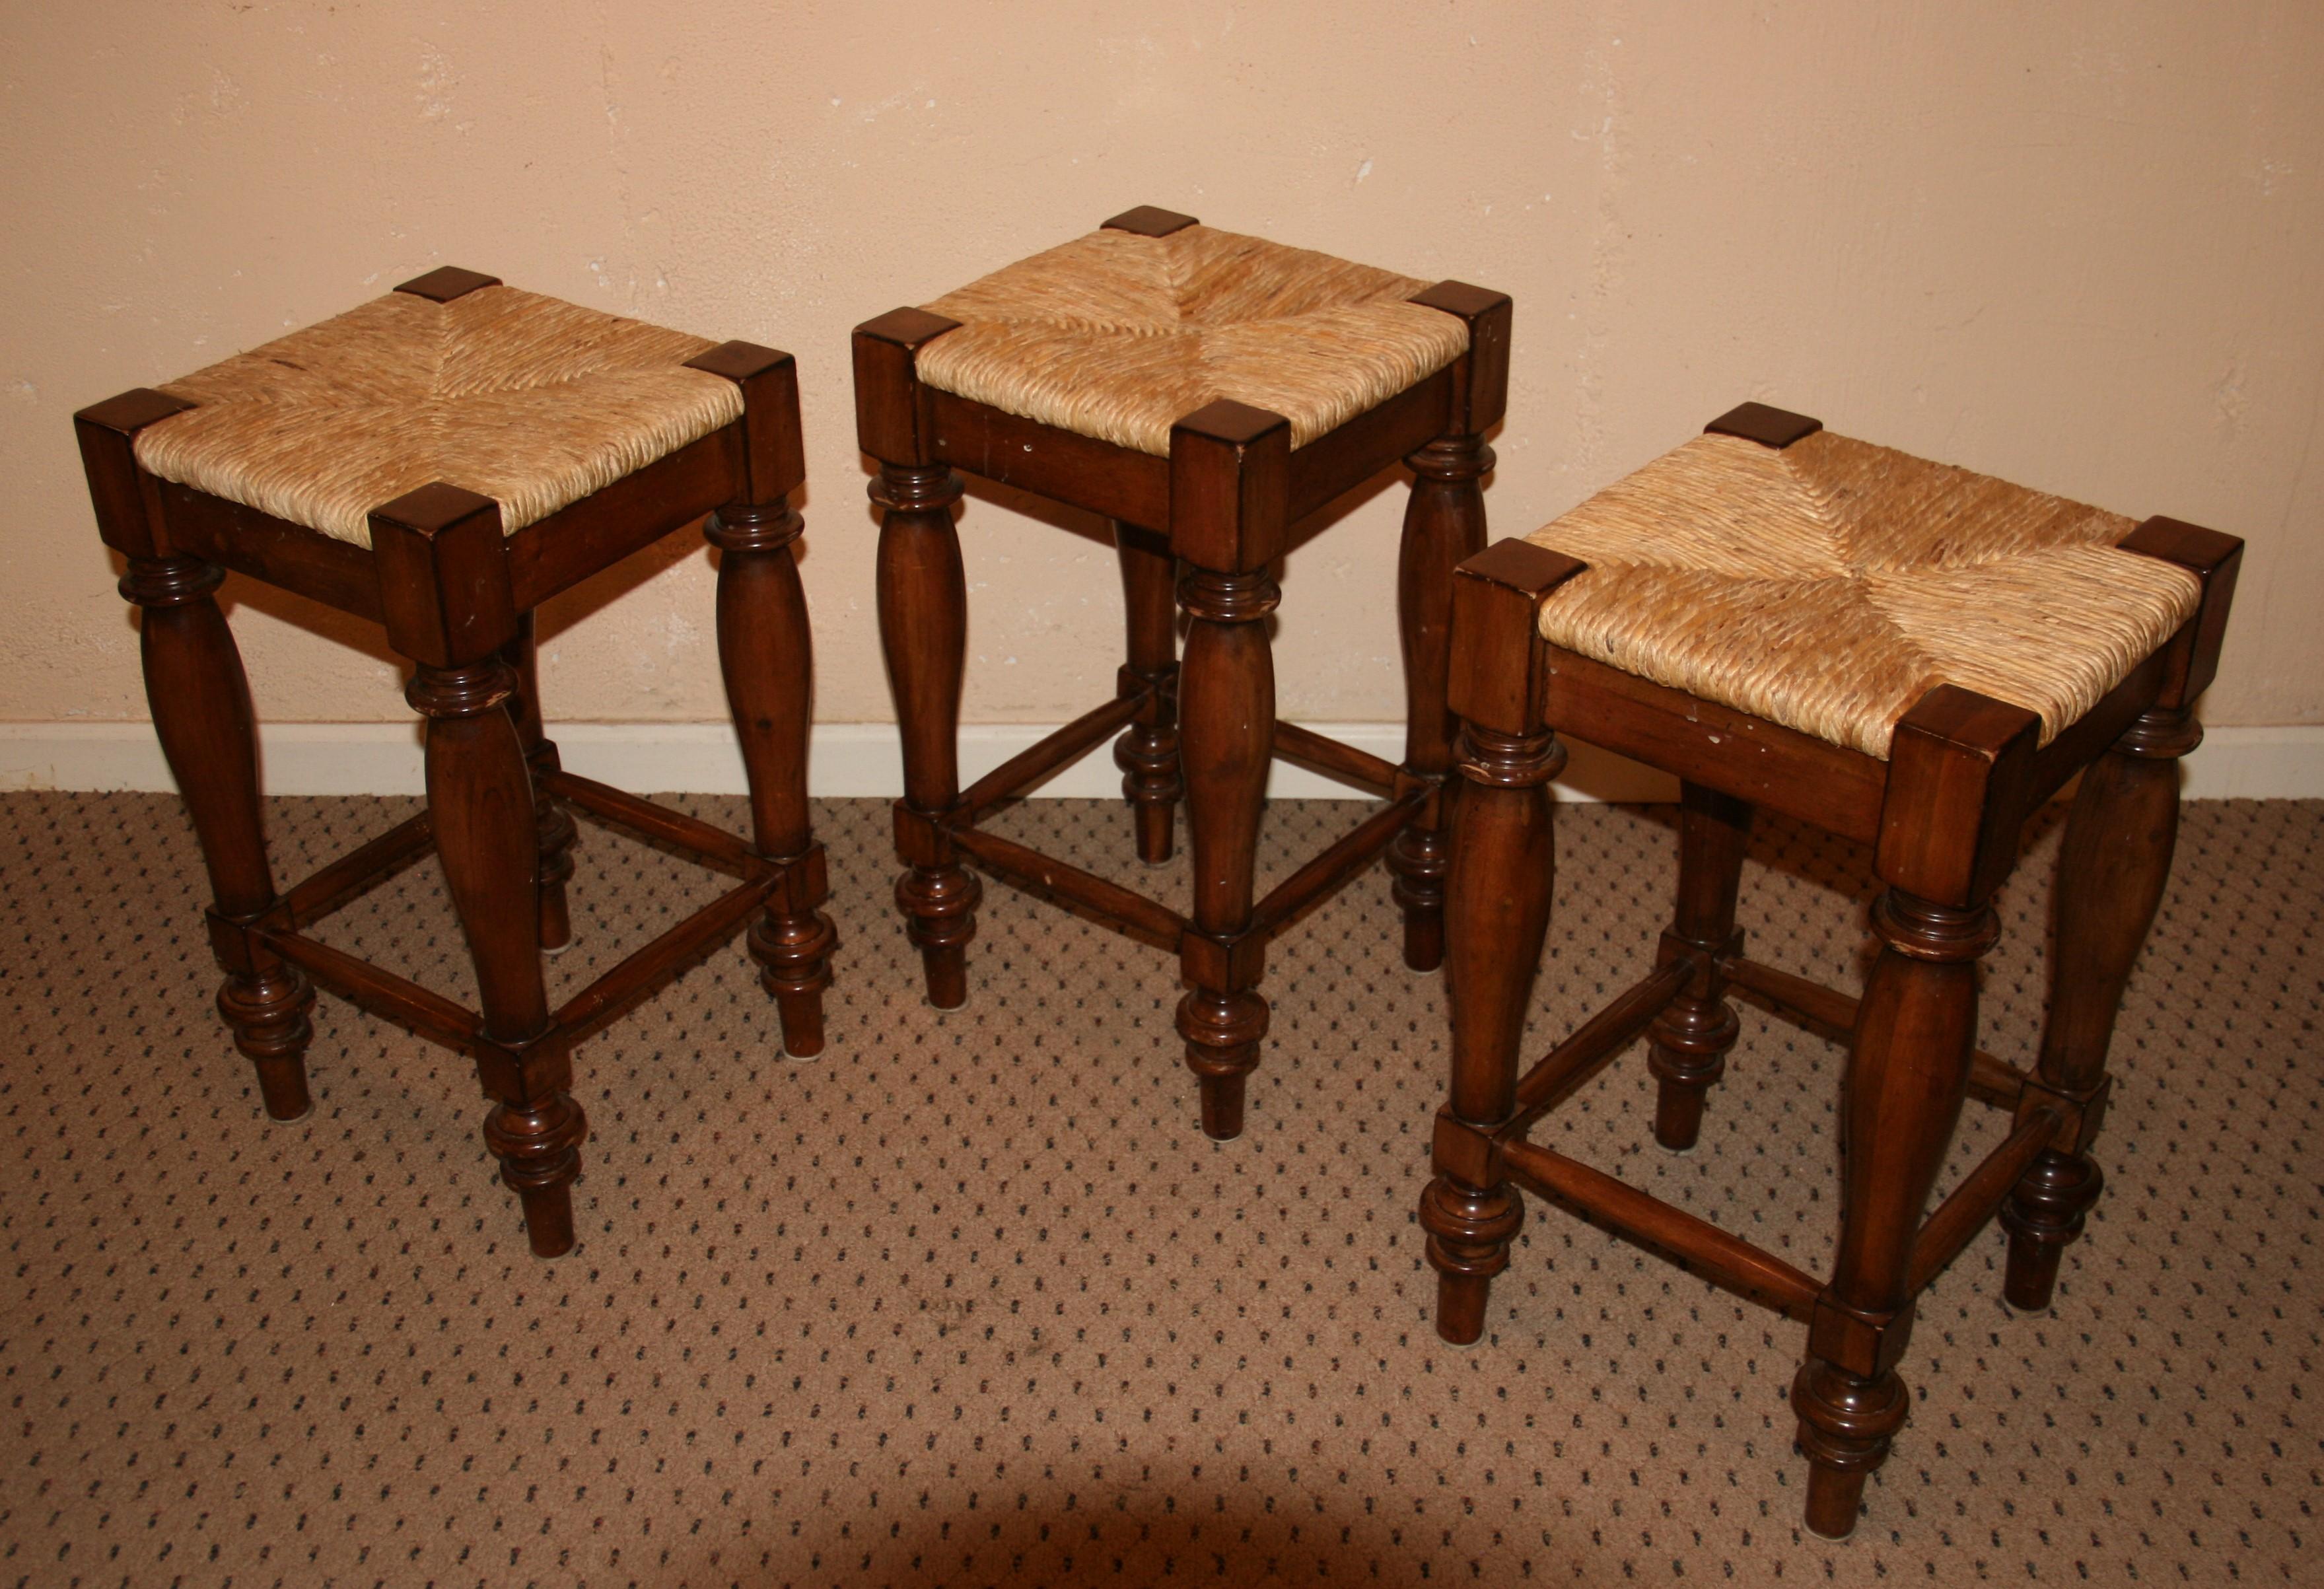 Set of 3 sold beech wood turned leg with rush seats bar stools.